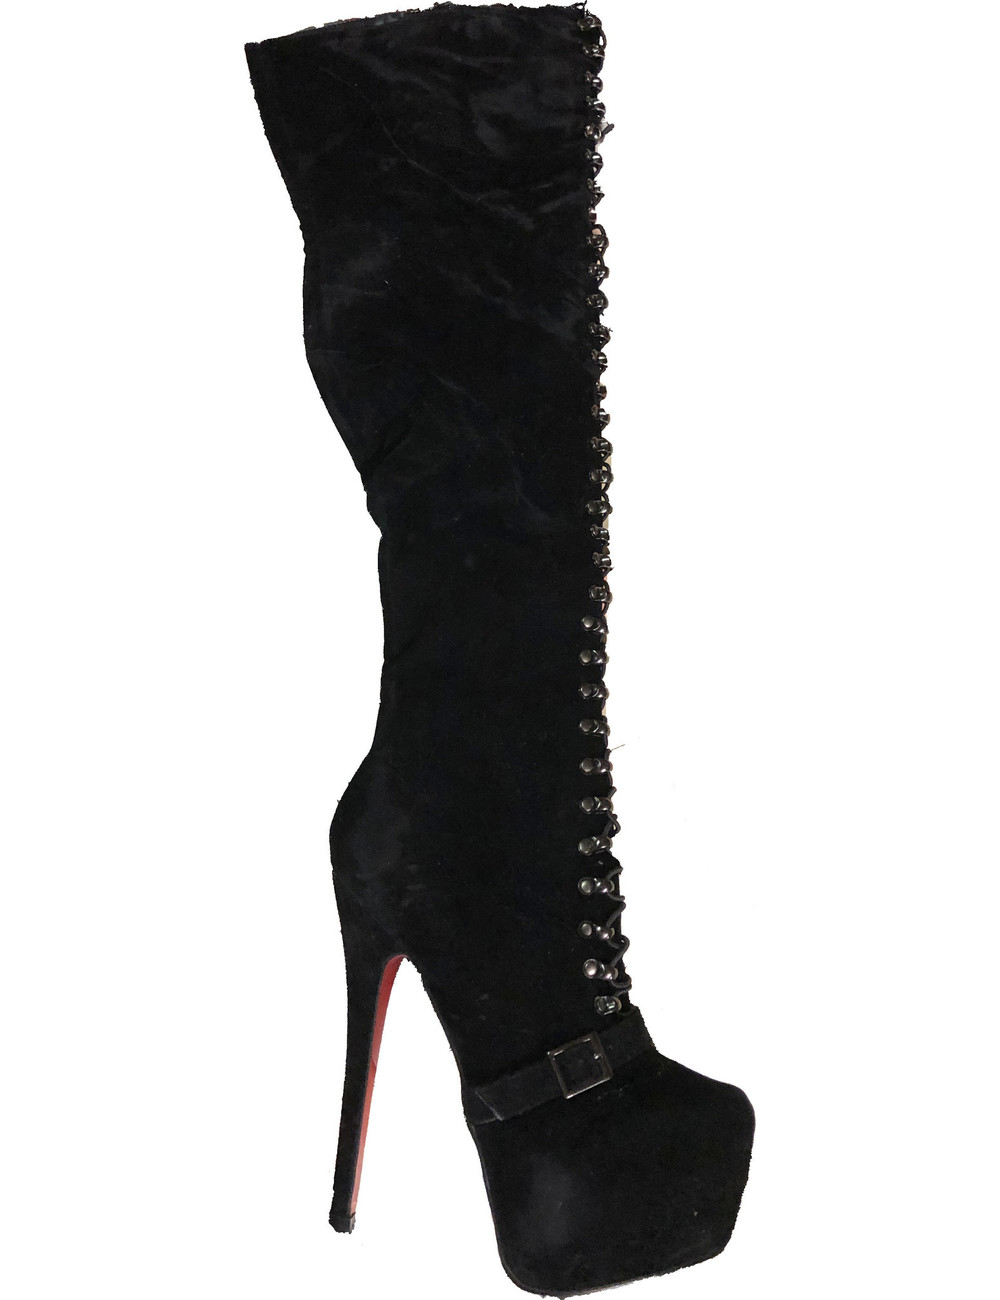 CoCo Vegan Black earth high lace up boots with belt - red soles